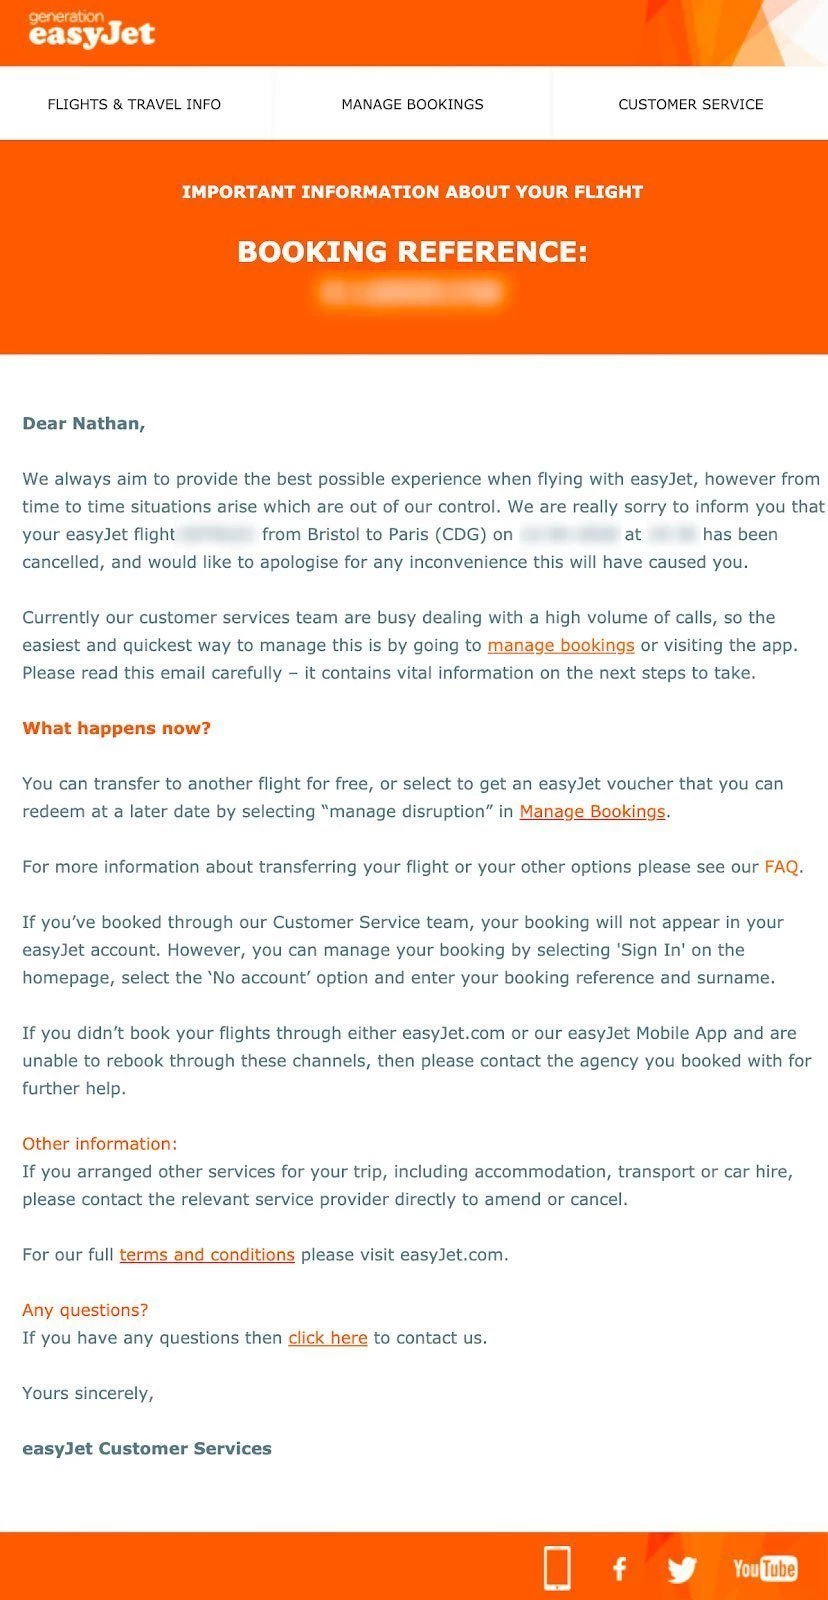 An order cancelation email example from Easyjet.